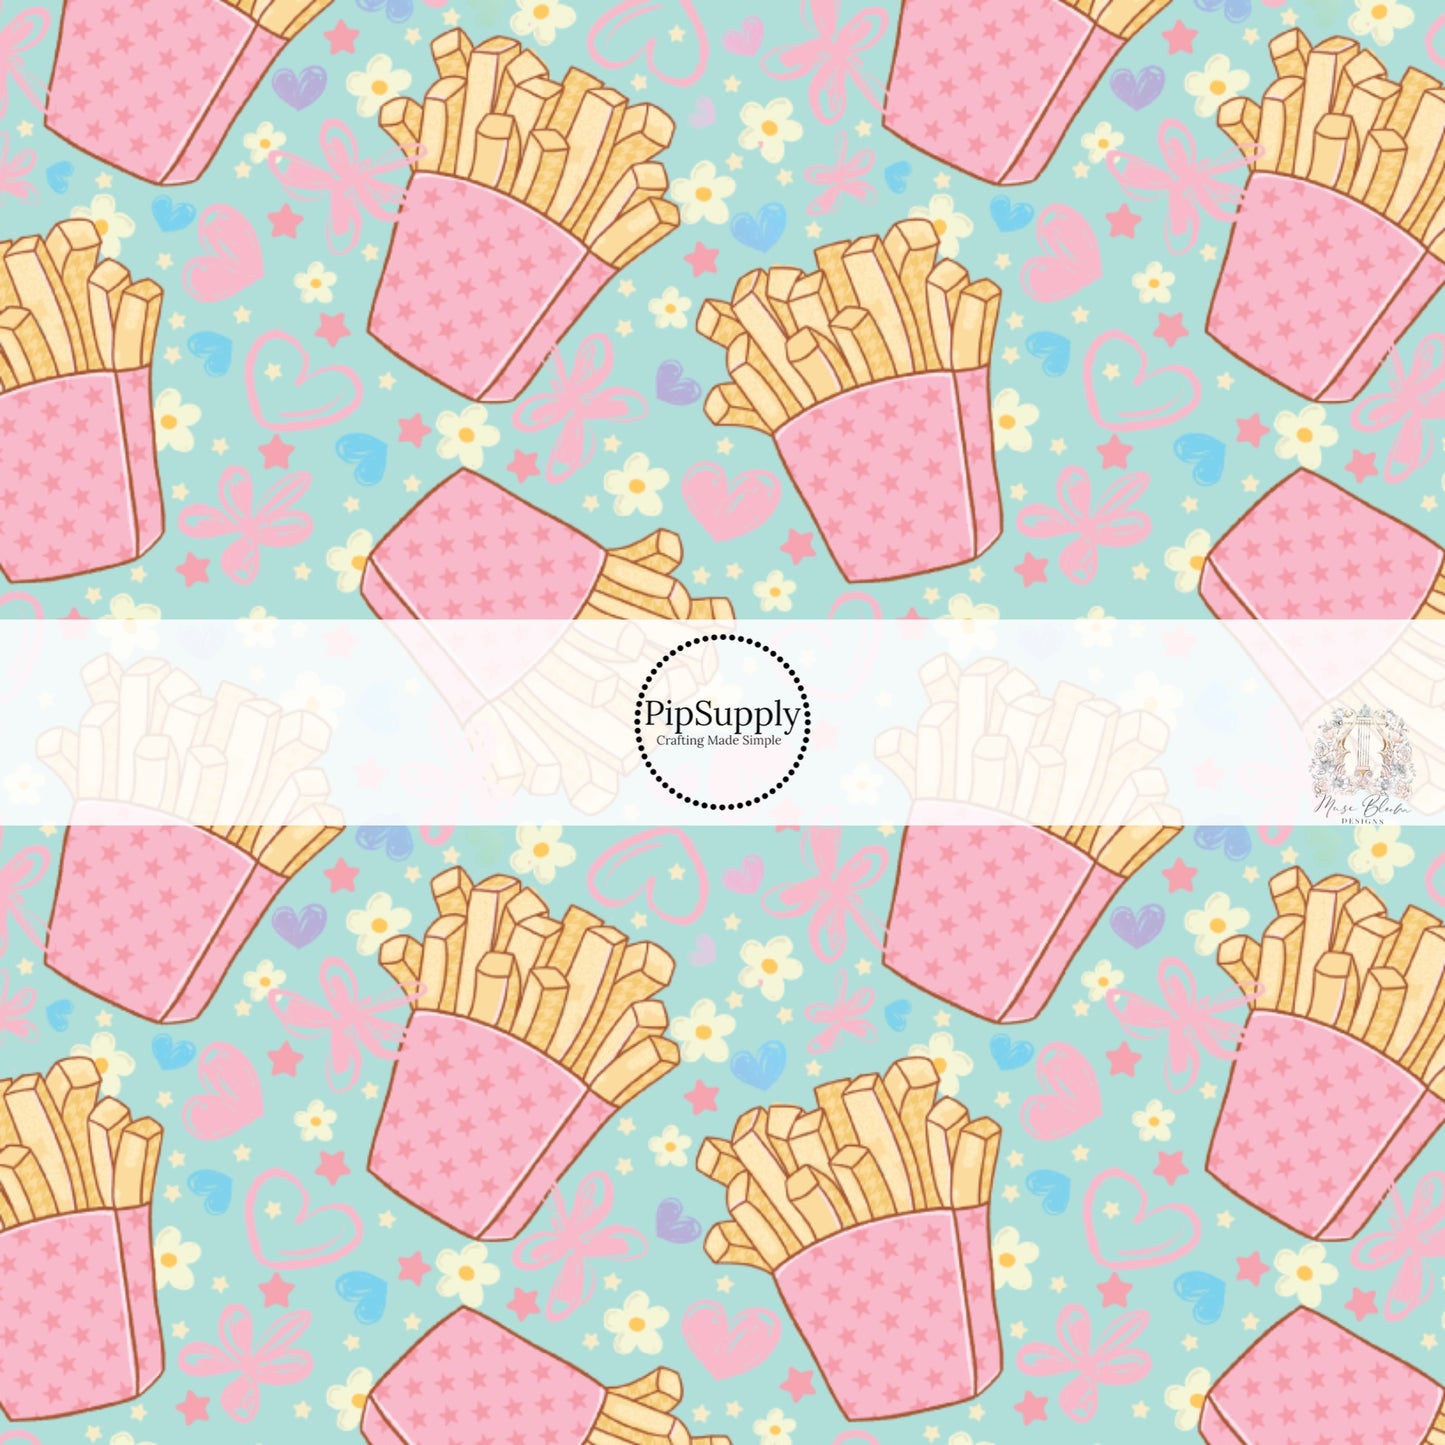 French Fries and Hearts Valentine's Day Themed Fabric by the Yard.